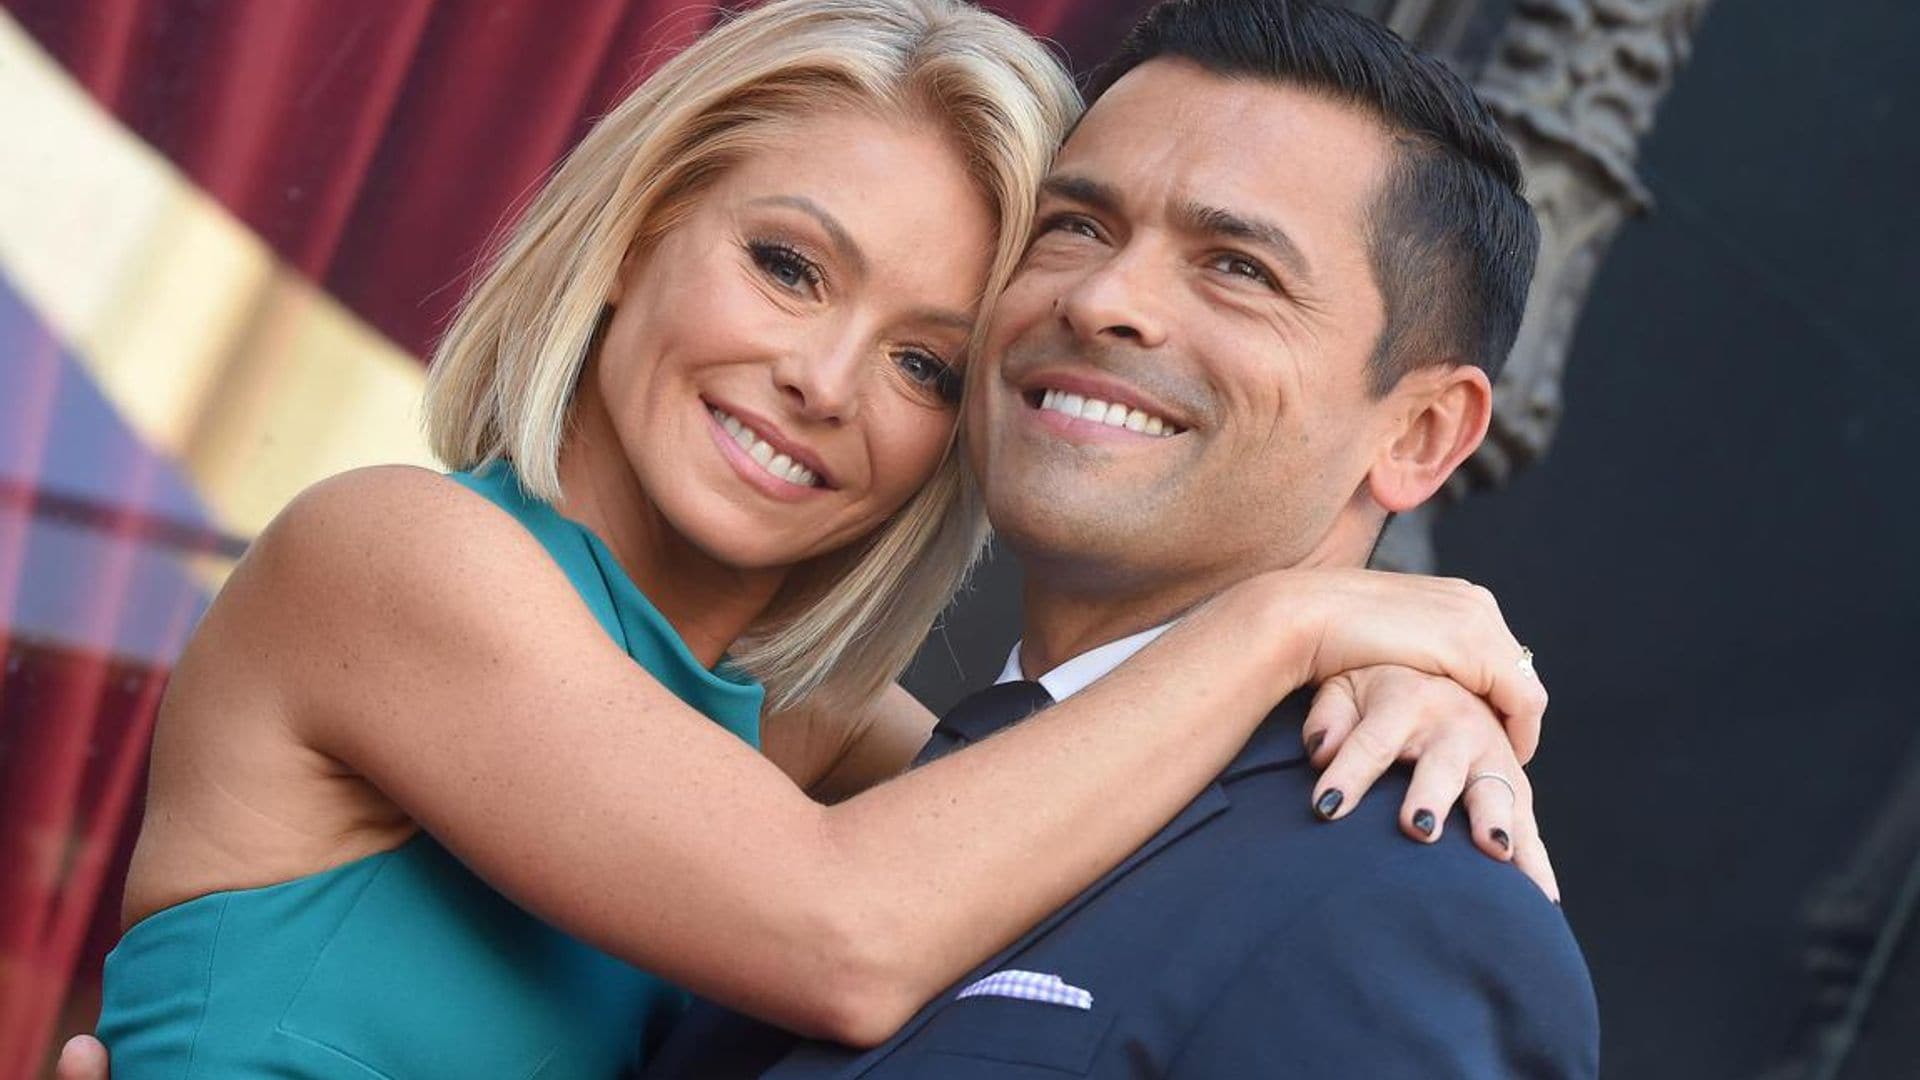 Kelly Ripa celebrates two anniversaries with two special men in her life